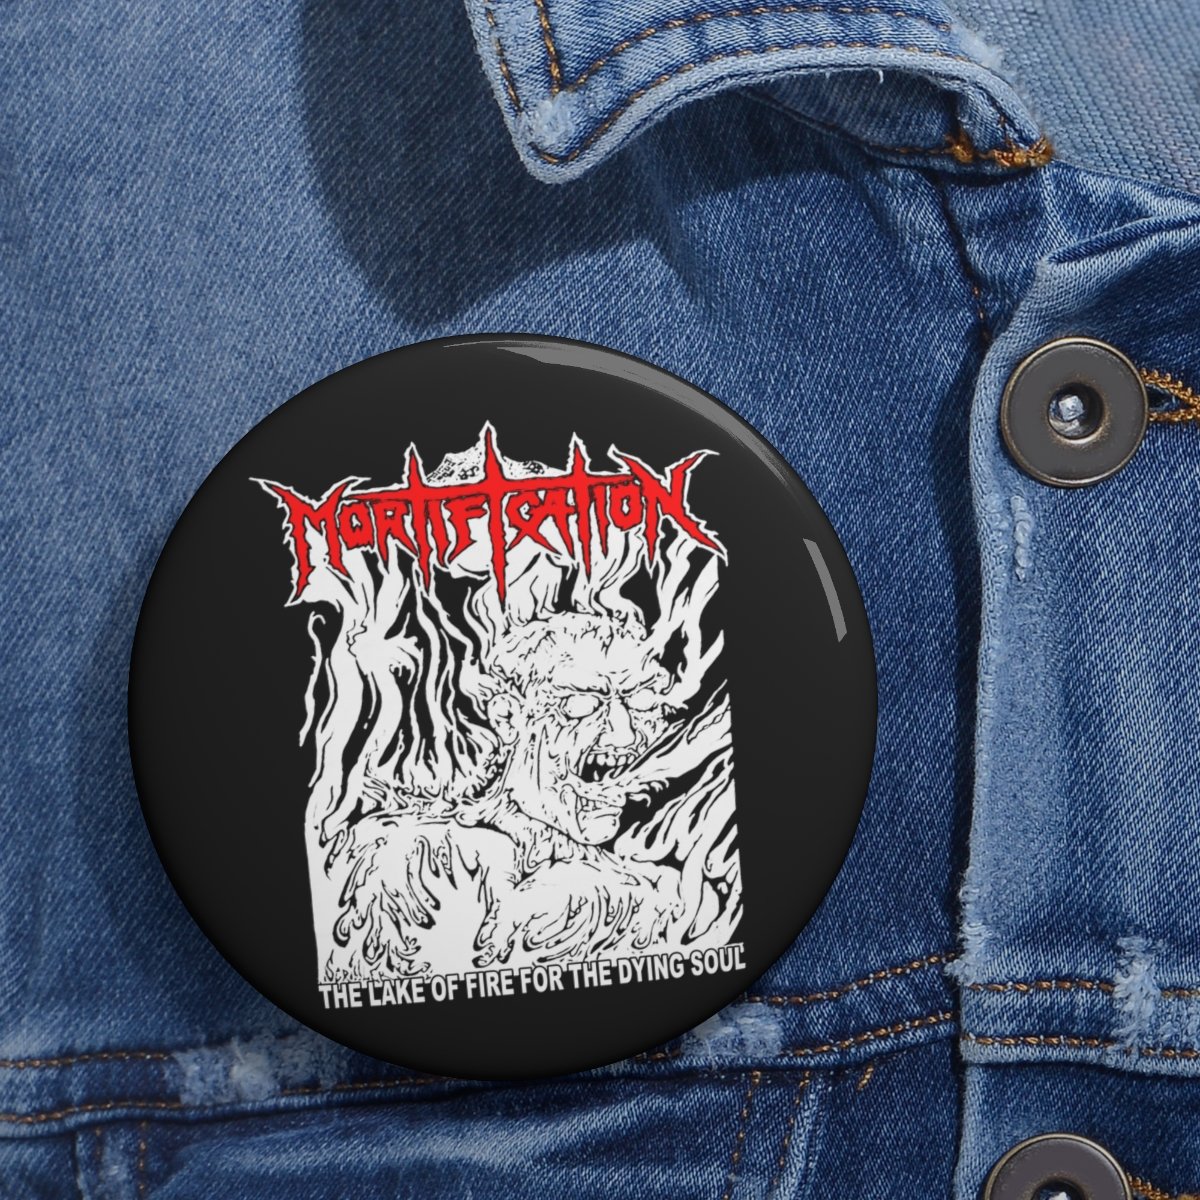 Mortification – The Lake of Fire Pin Buttons